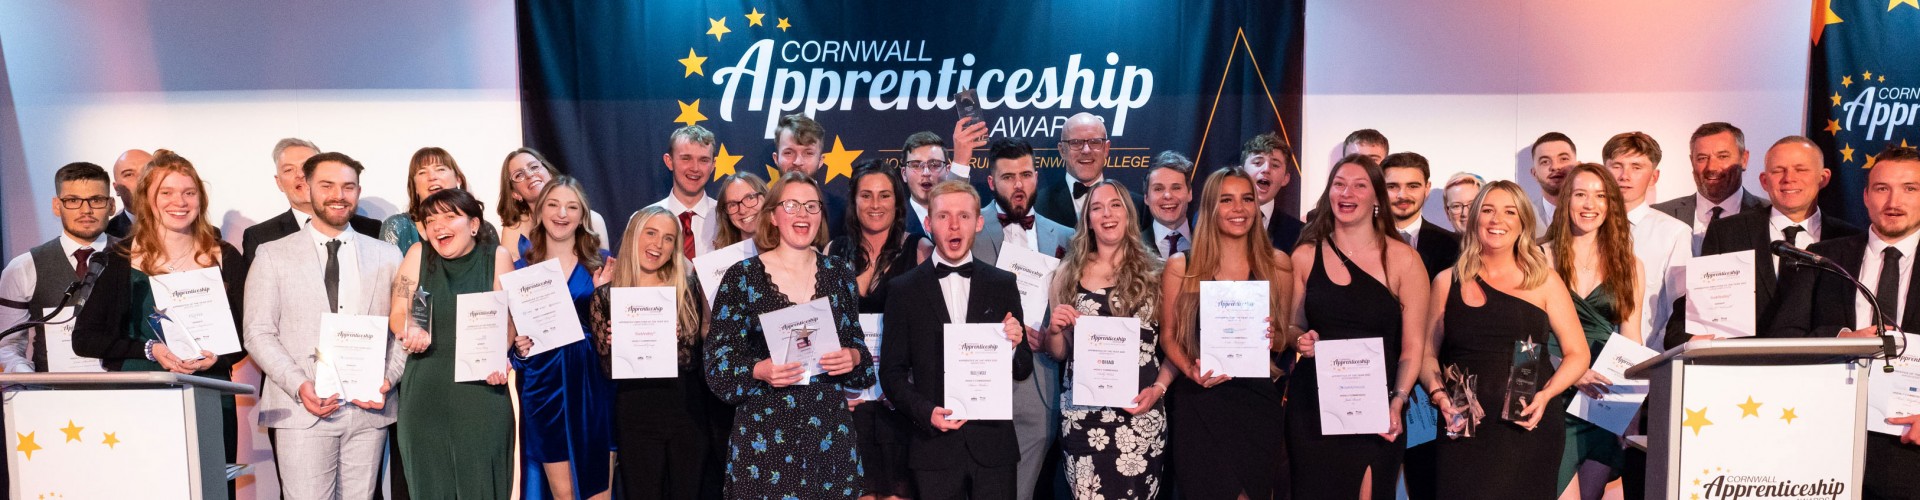 Winners of the Cornwall Apprenticeship Awards